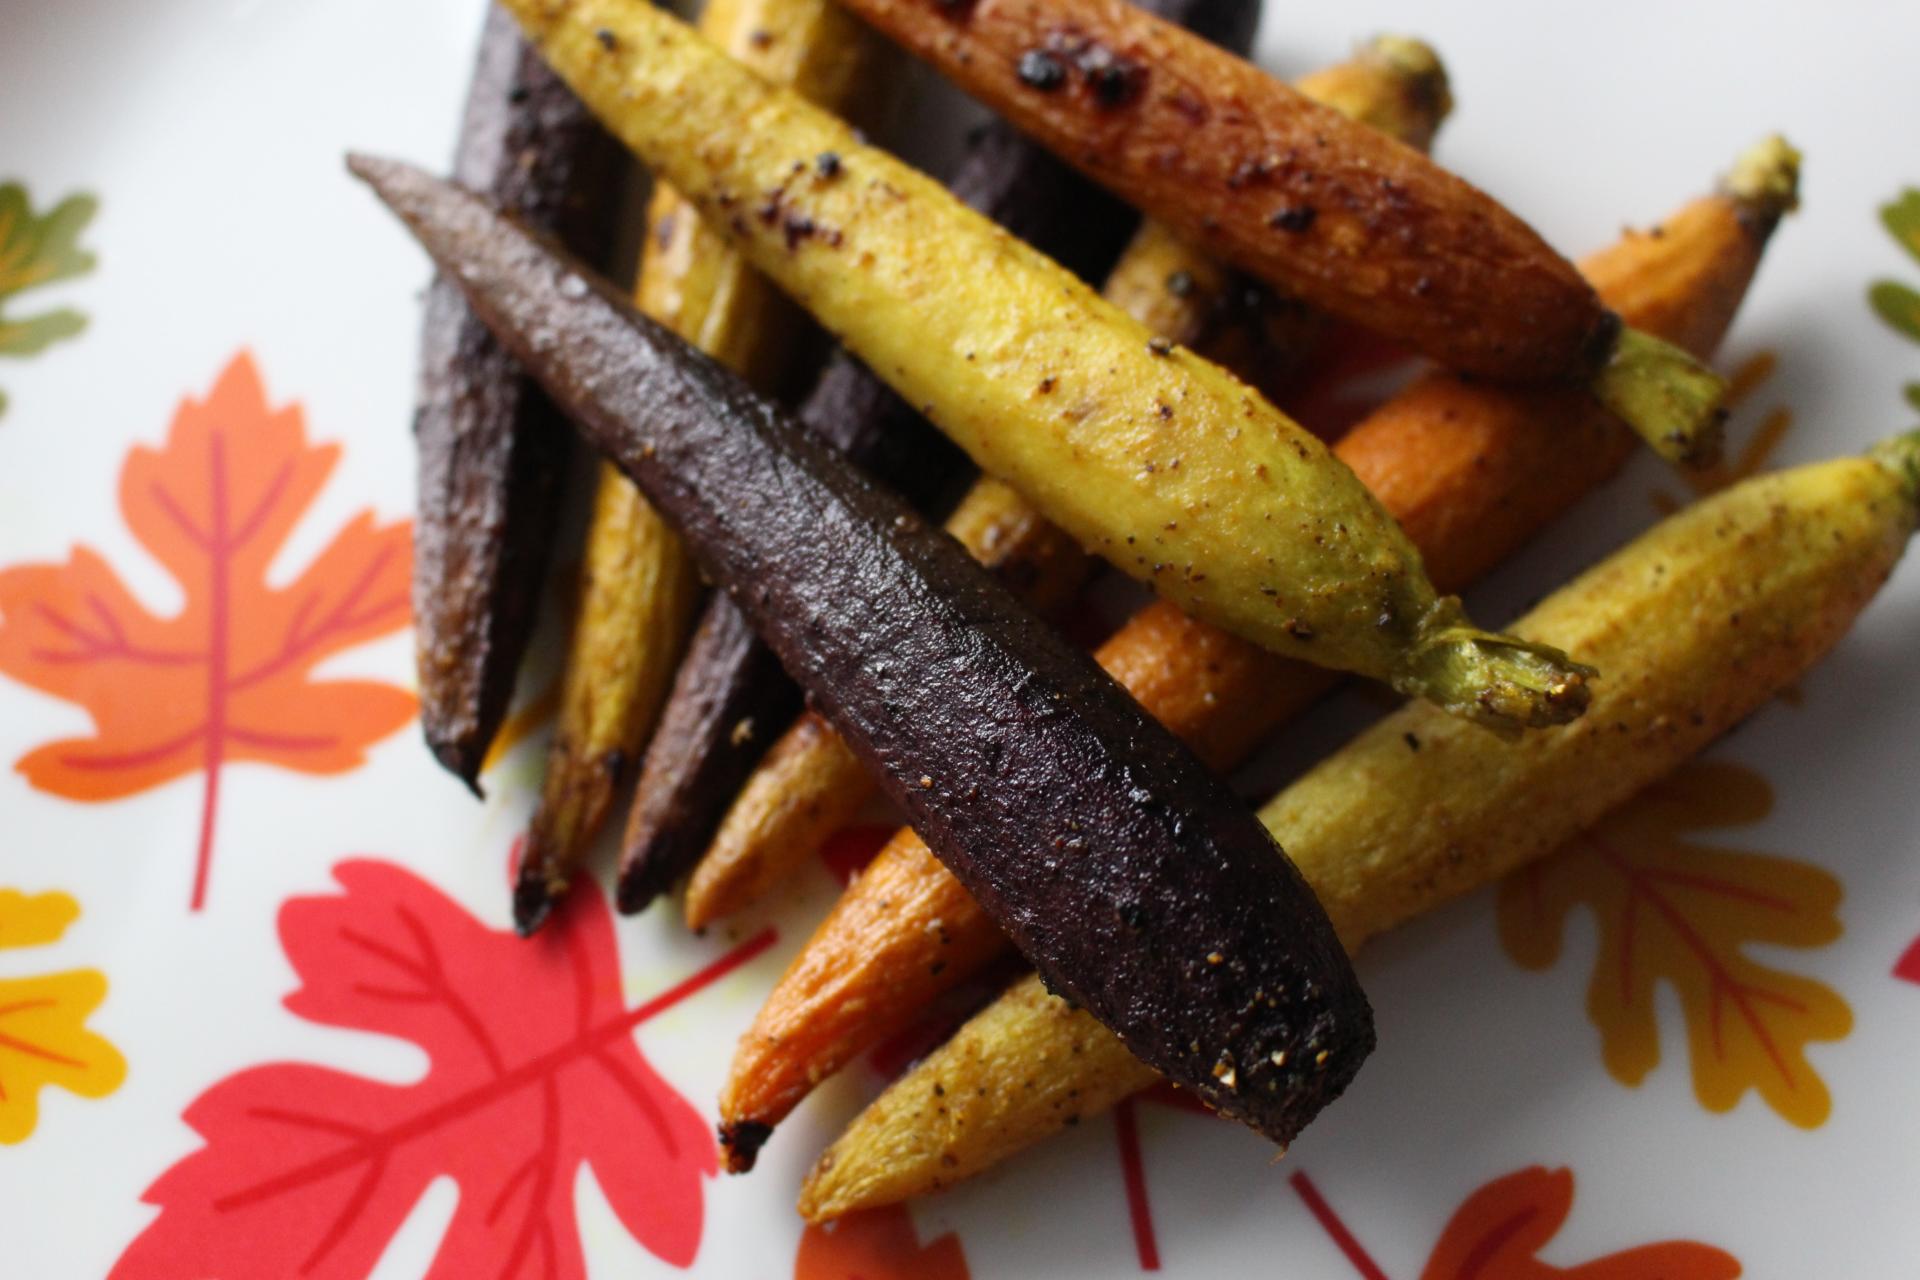 VEGGIES: Curry Roasted Rainbow Carrots by New Jersey foodie blogger What's For Dinner Esq.